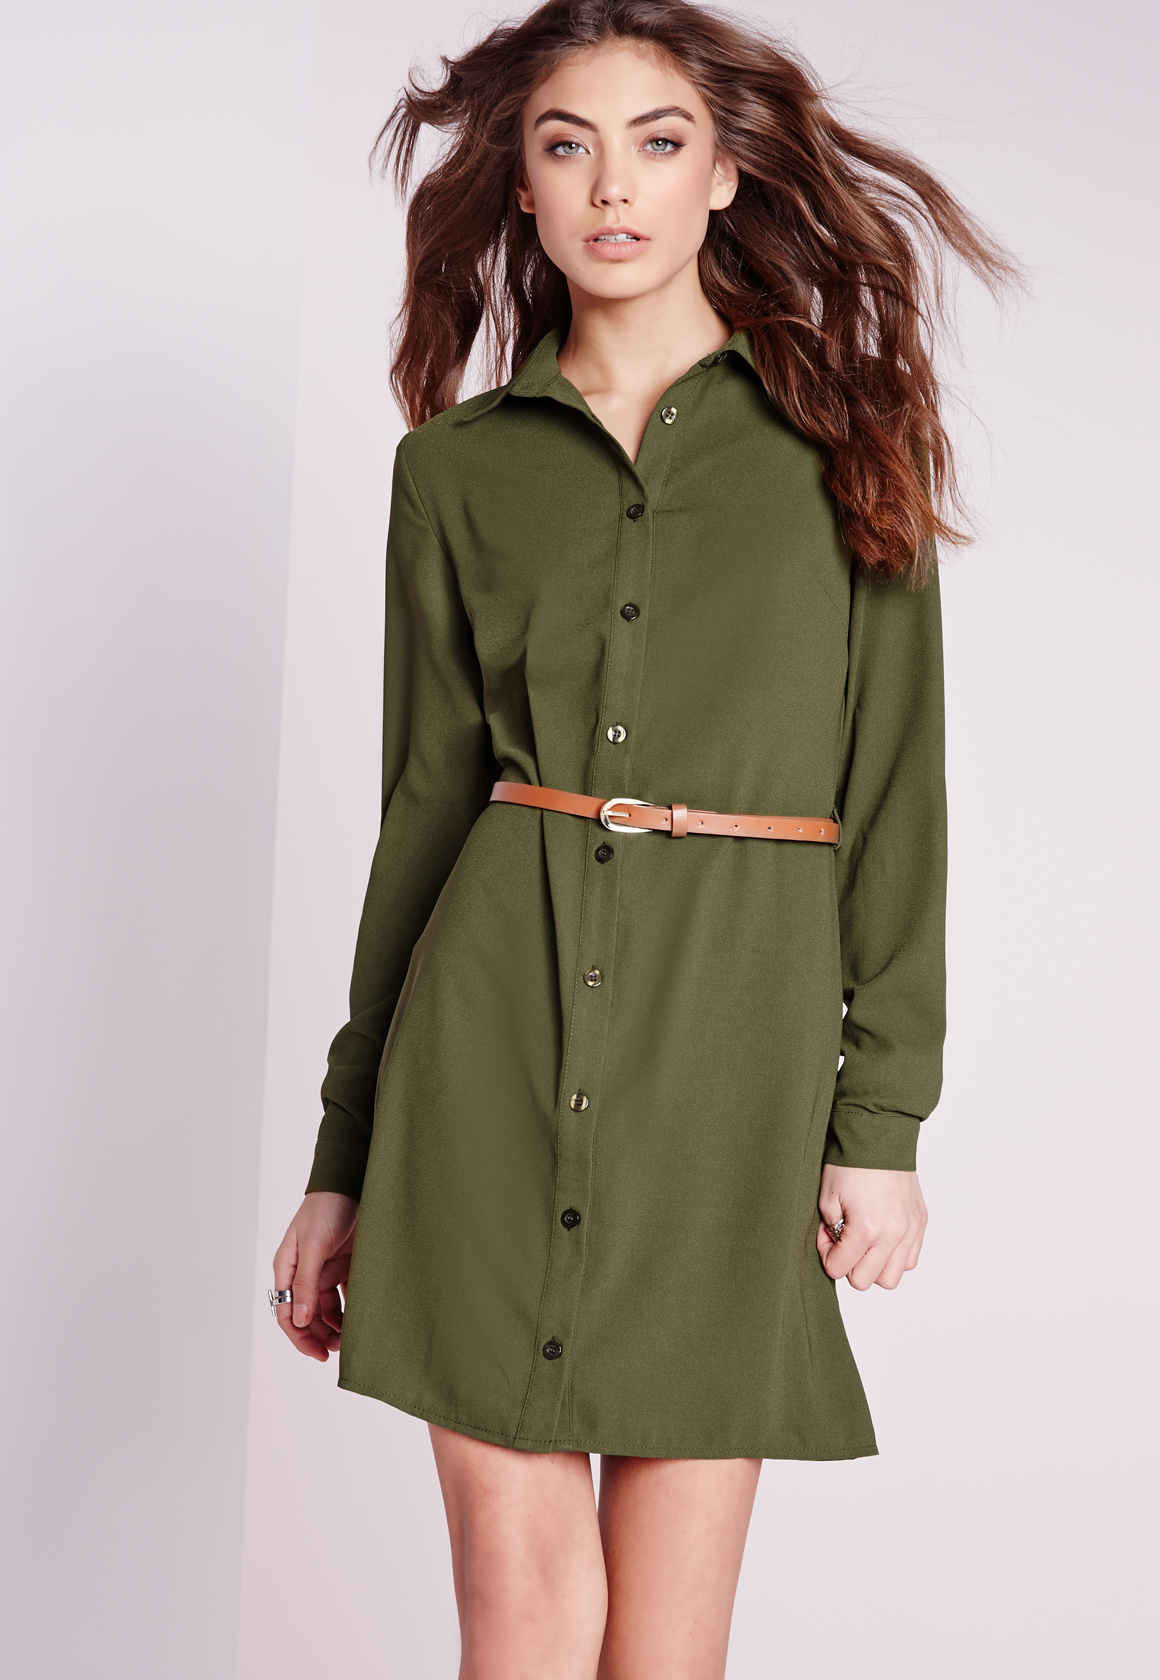 Lyst Missguided Long Sleeve Belted  Shirt  Dress  Khaki  in 